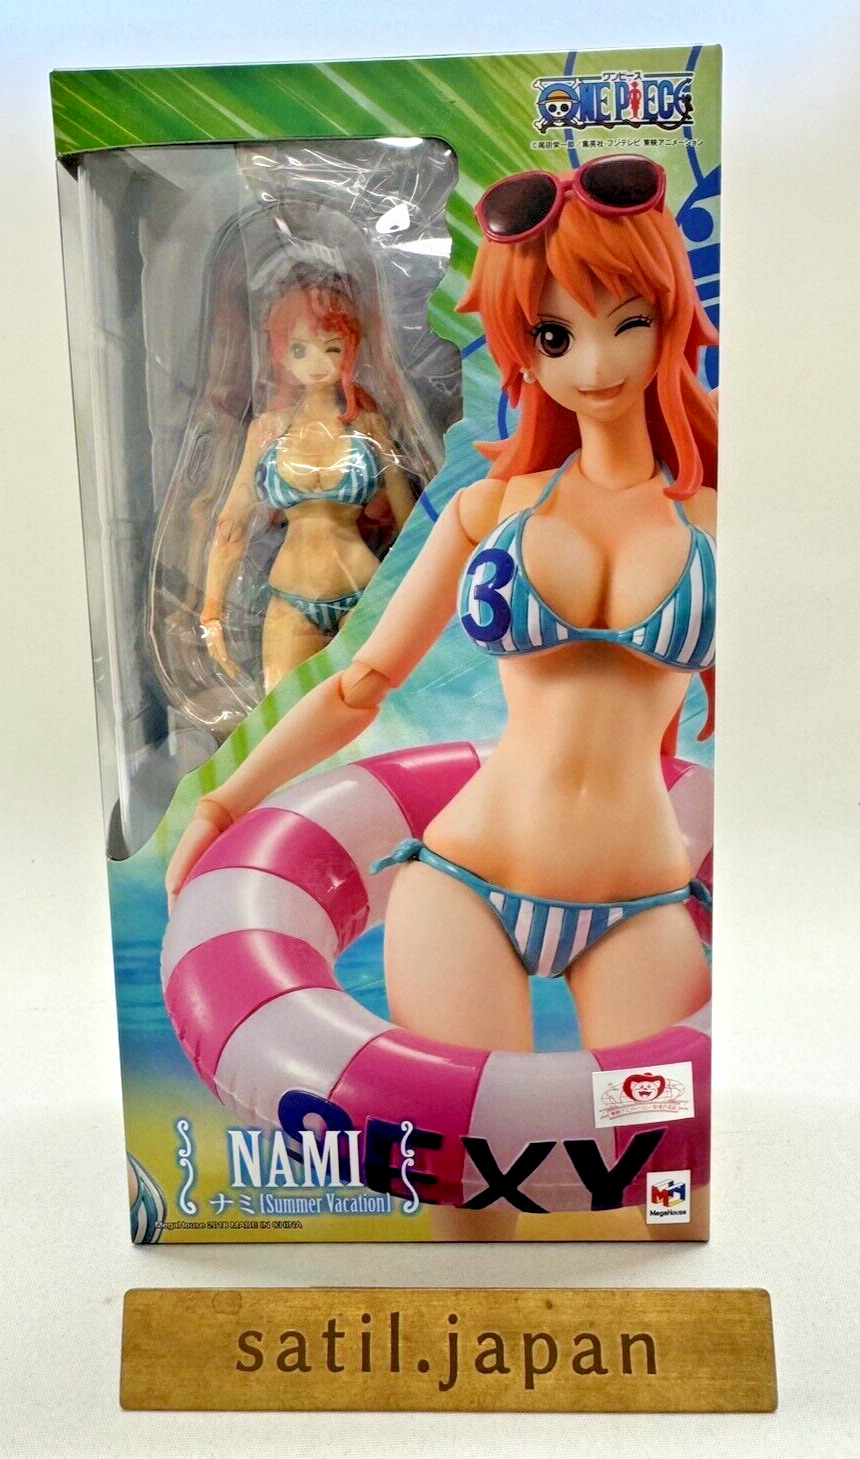 [NEW] Megahouse One Piece Variable Action Heroes Nami Summer Vacation Figure